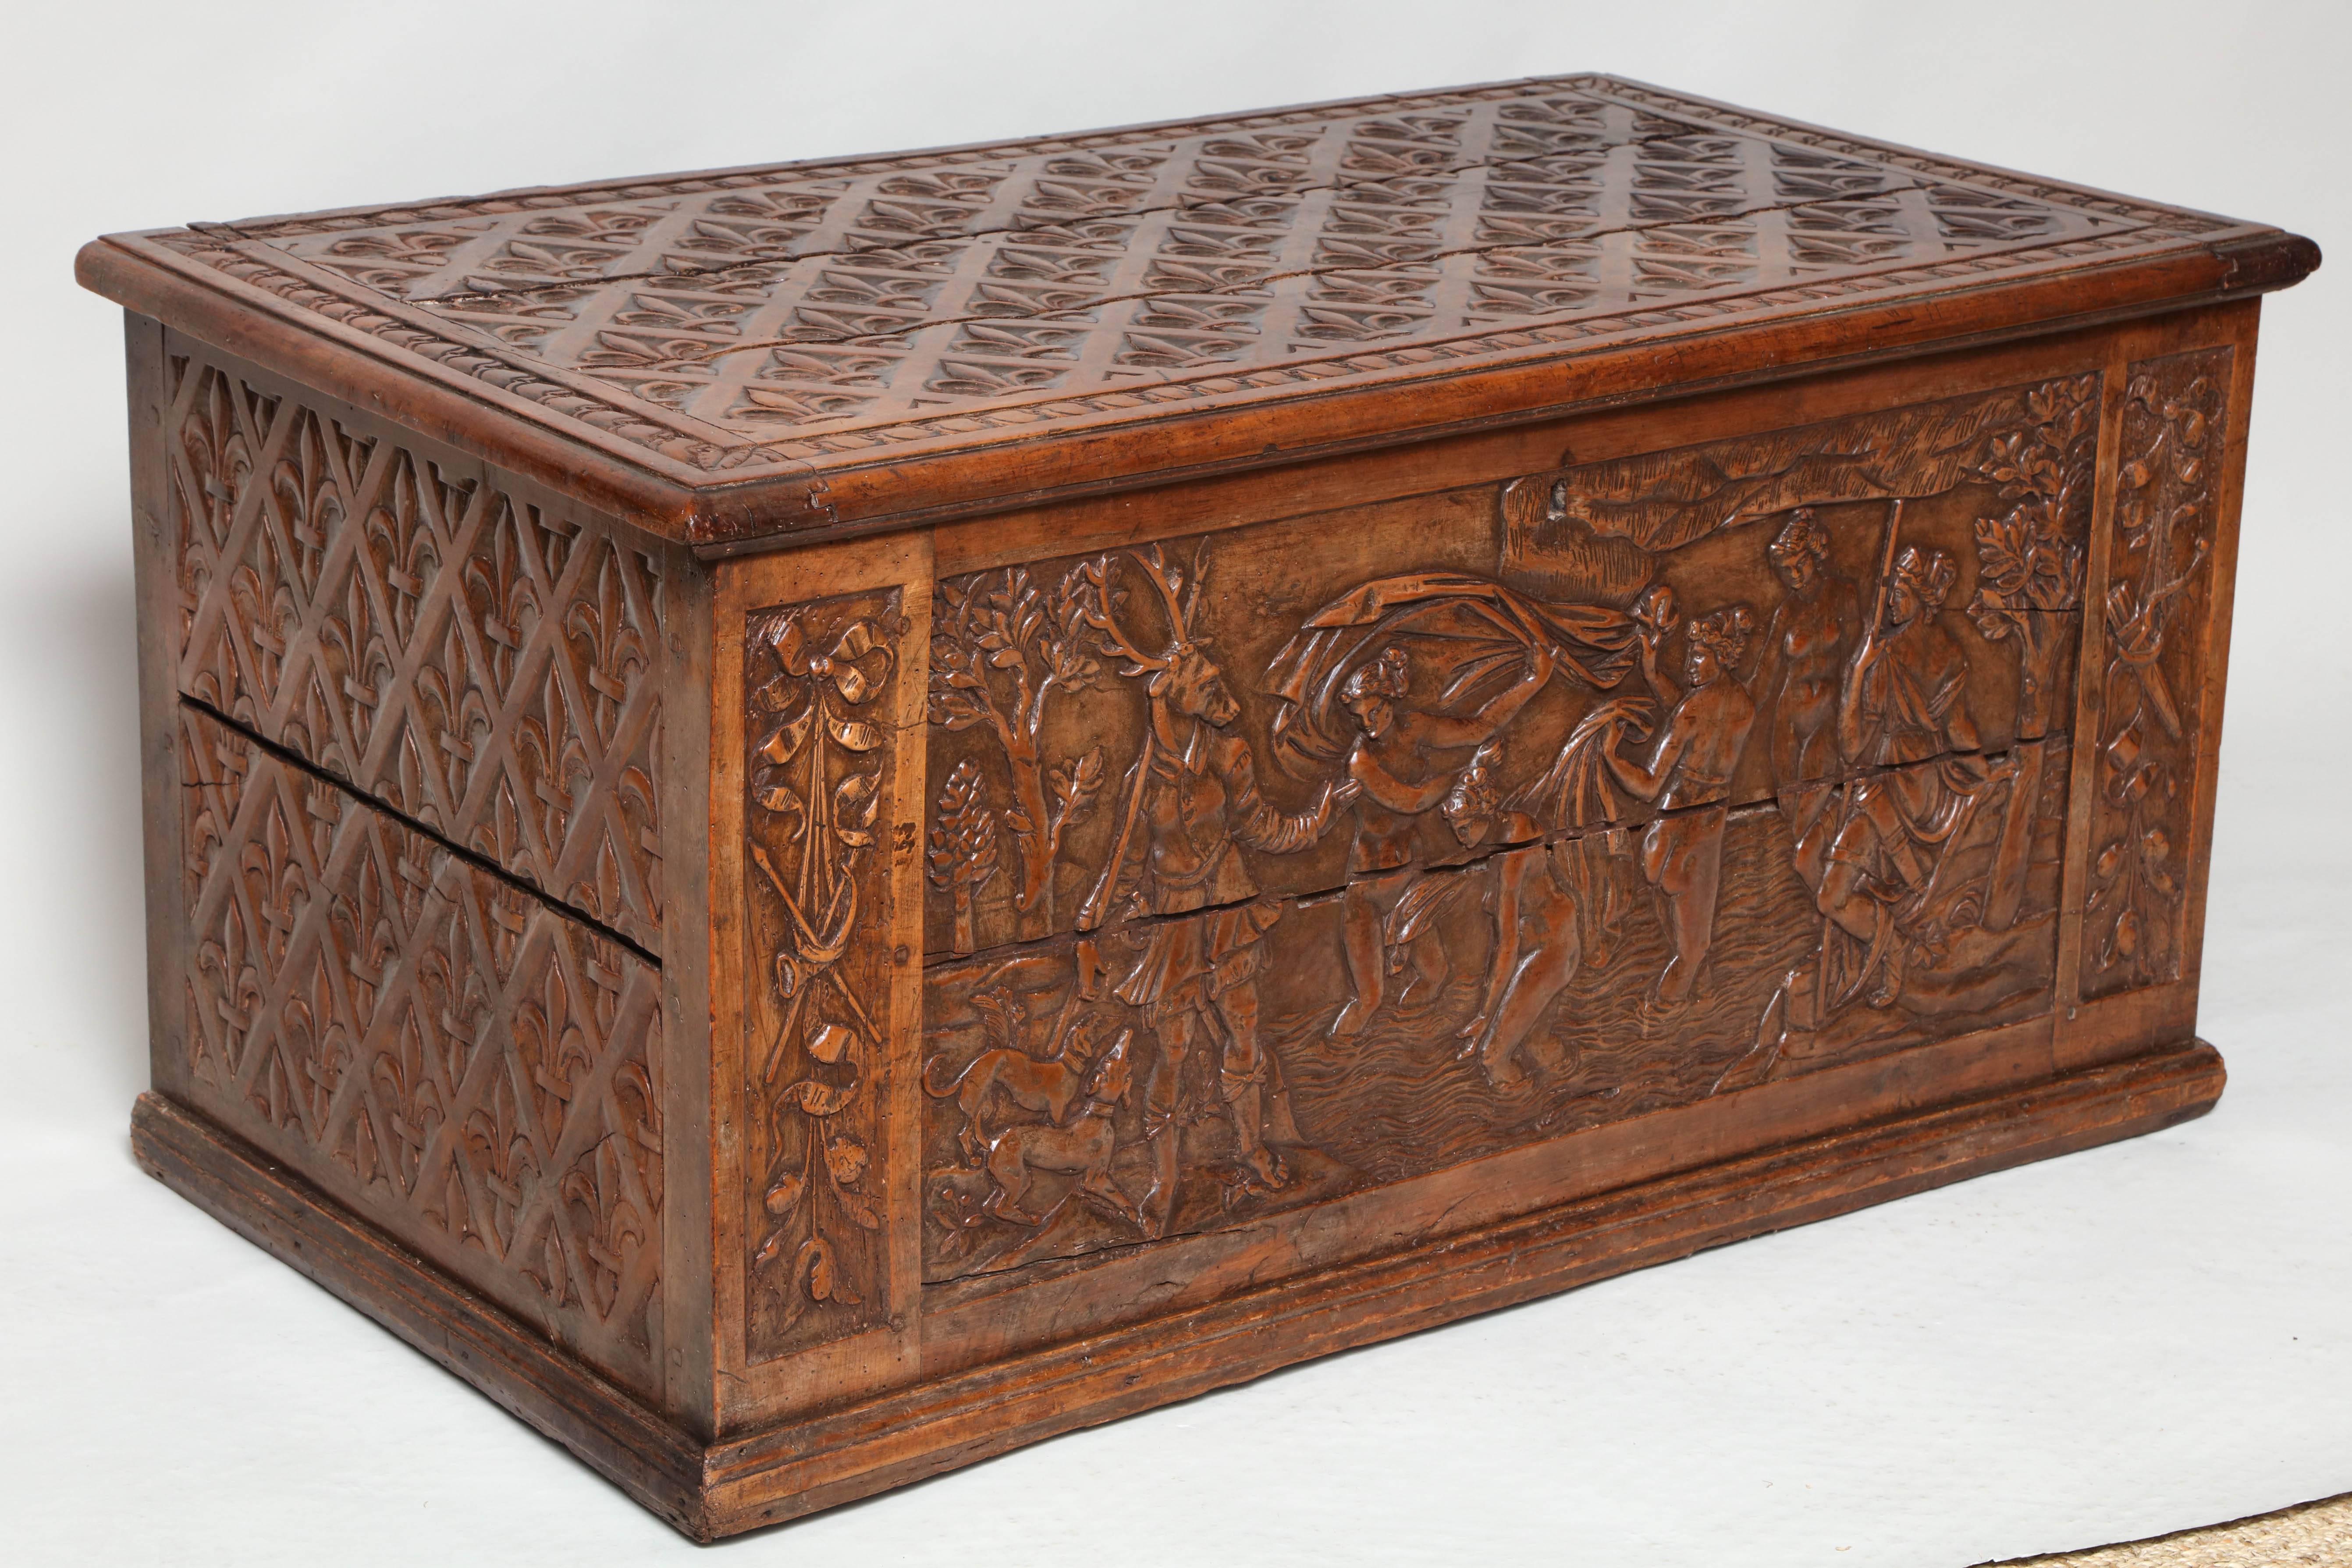 Very fine 16th century carved pear or boxwood coffer, the lid and sides chip carved with fleur-de-lis pattern, the front carved with a depiction of Diana and Actaeon, the noble hunter who accidentally interrupted a bathing Diana and who was turned